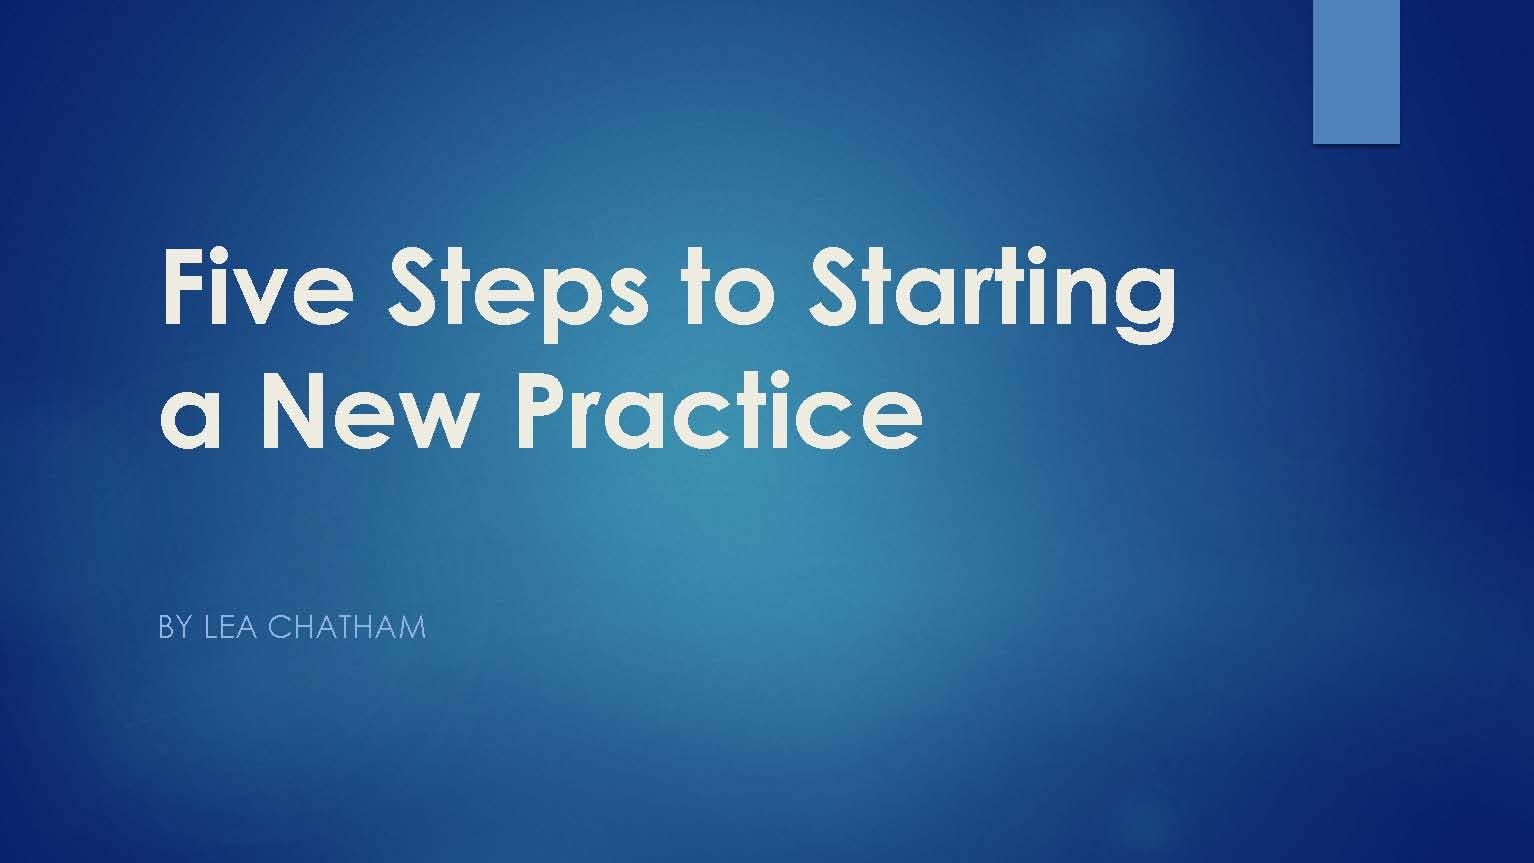 Five Steps to Starting a New Practice